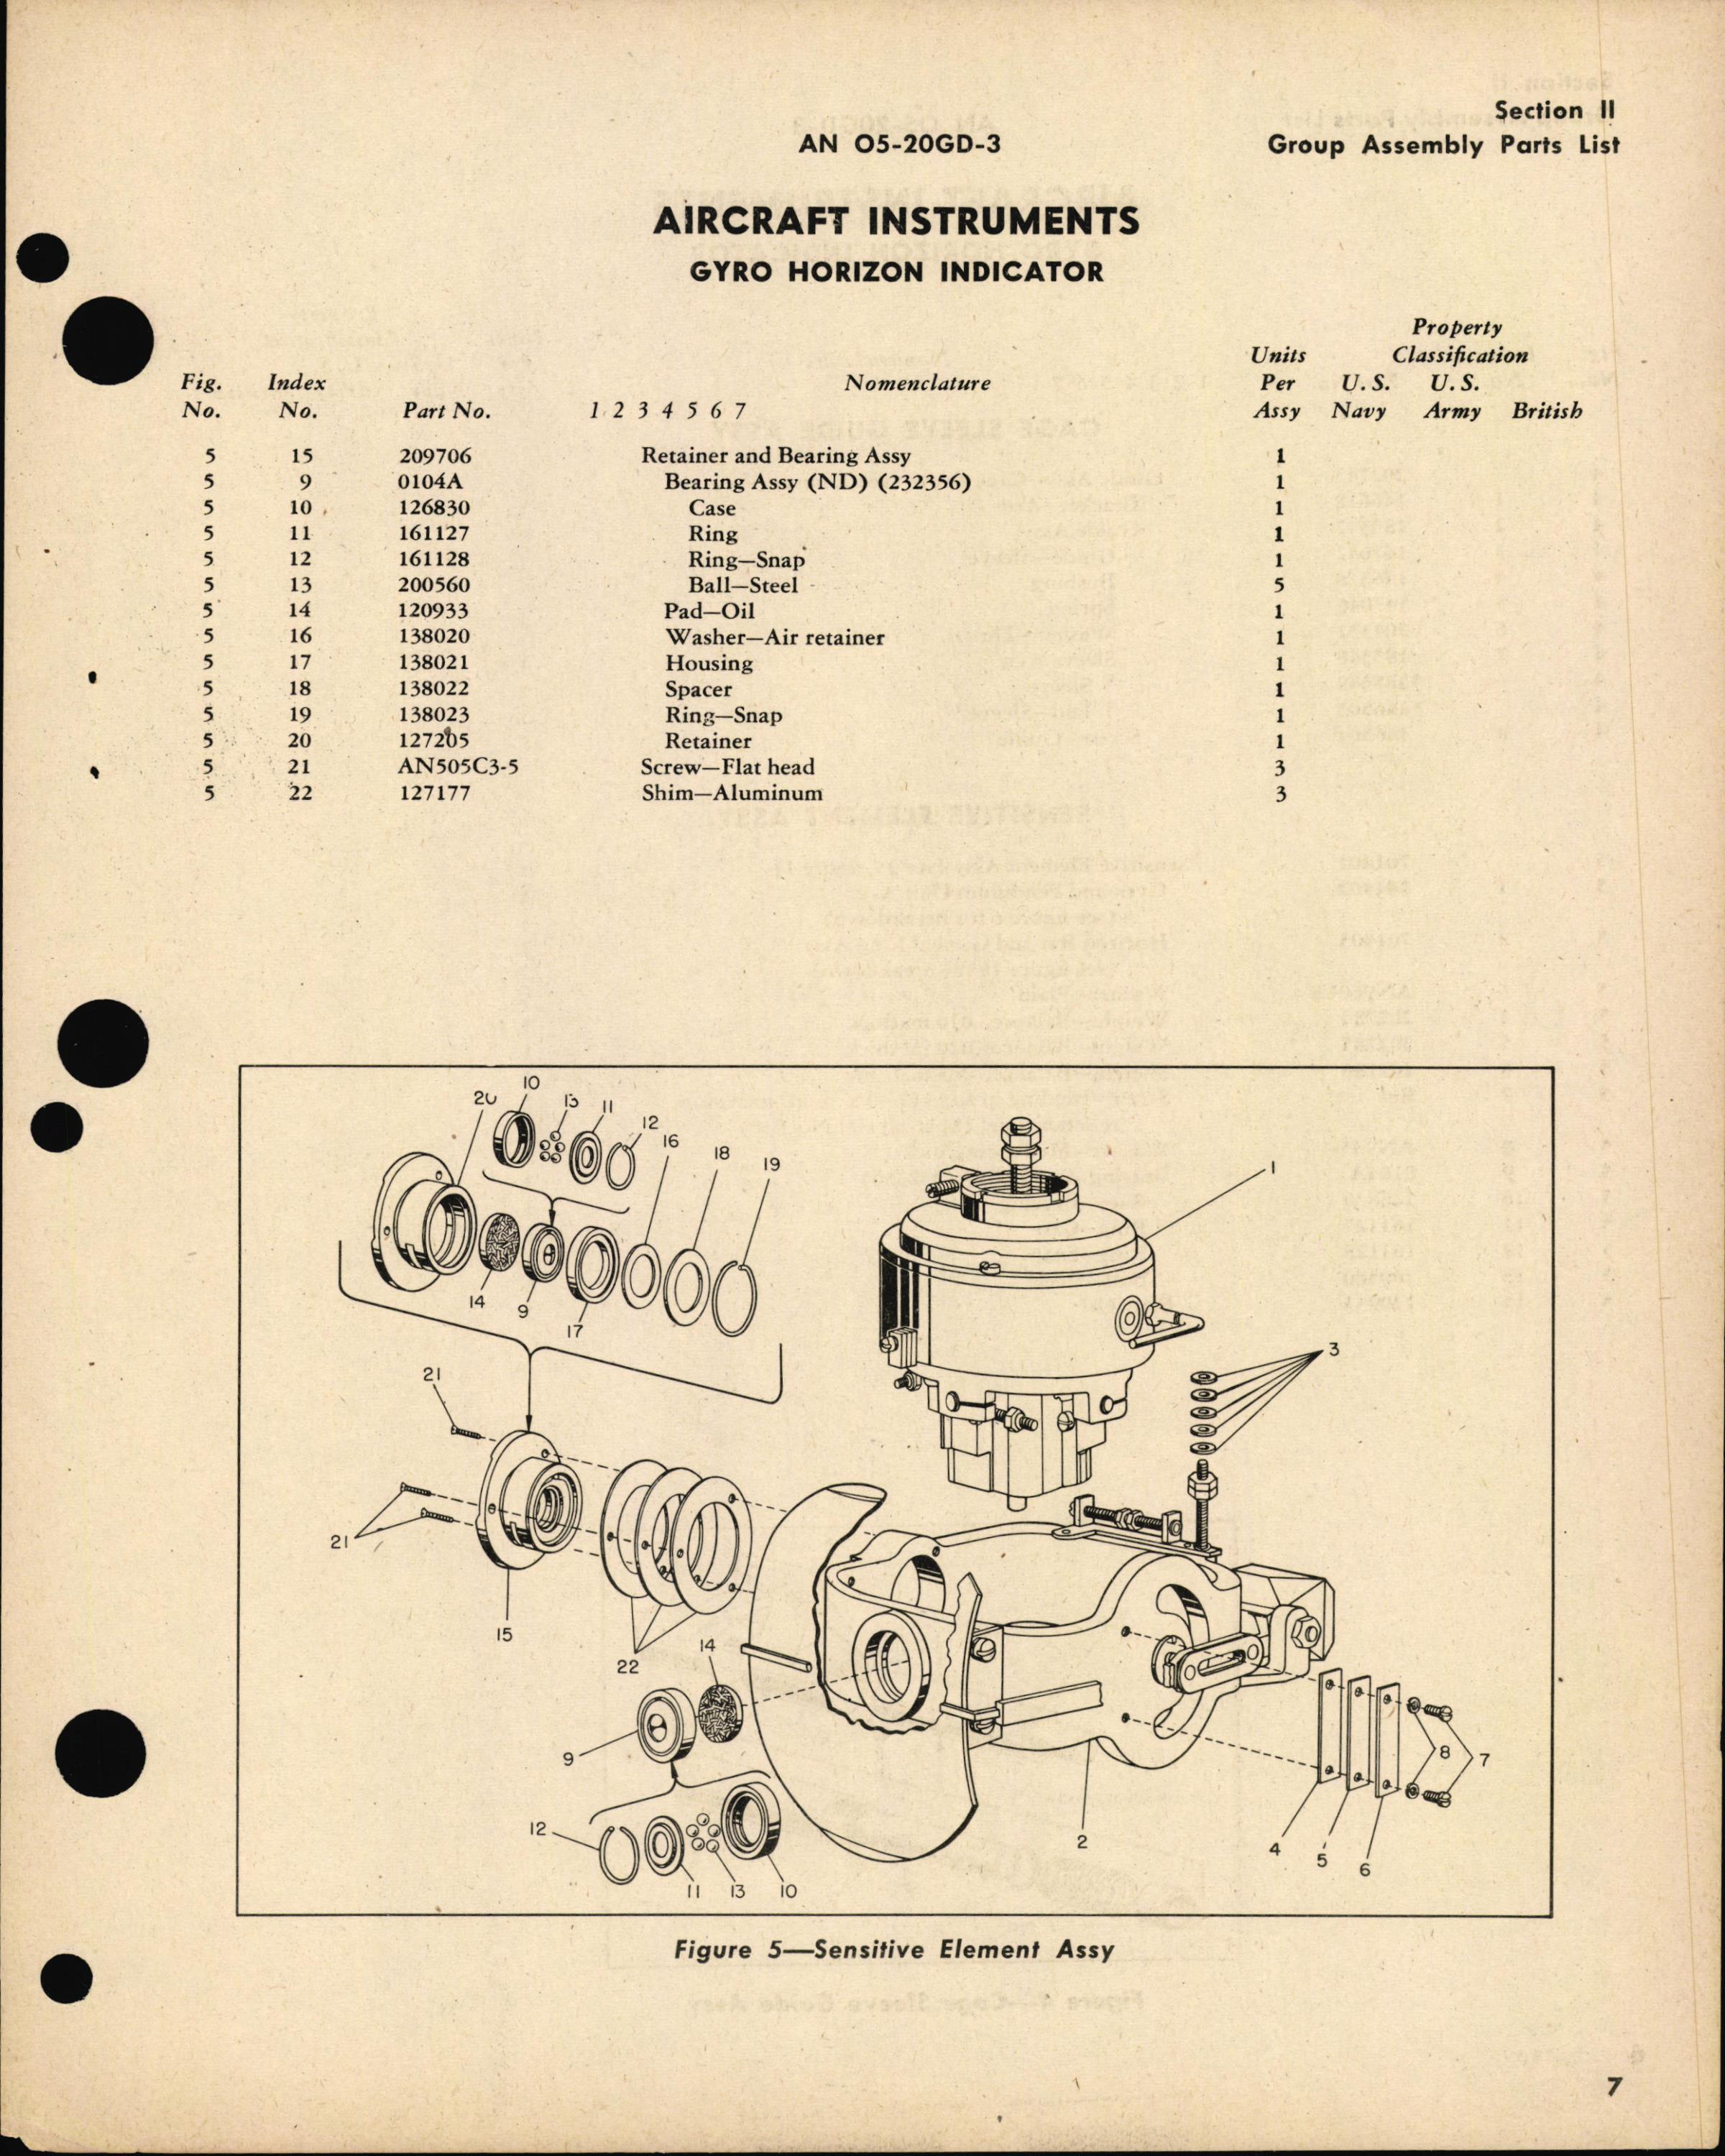 Sample page 11 from AirCorps Library document: Parts Catalog for Gyro Horizon Indicators Part No. 656768